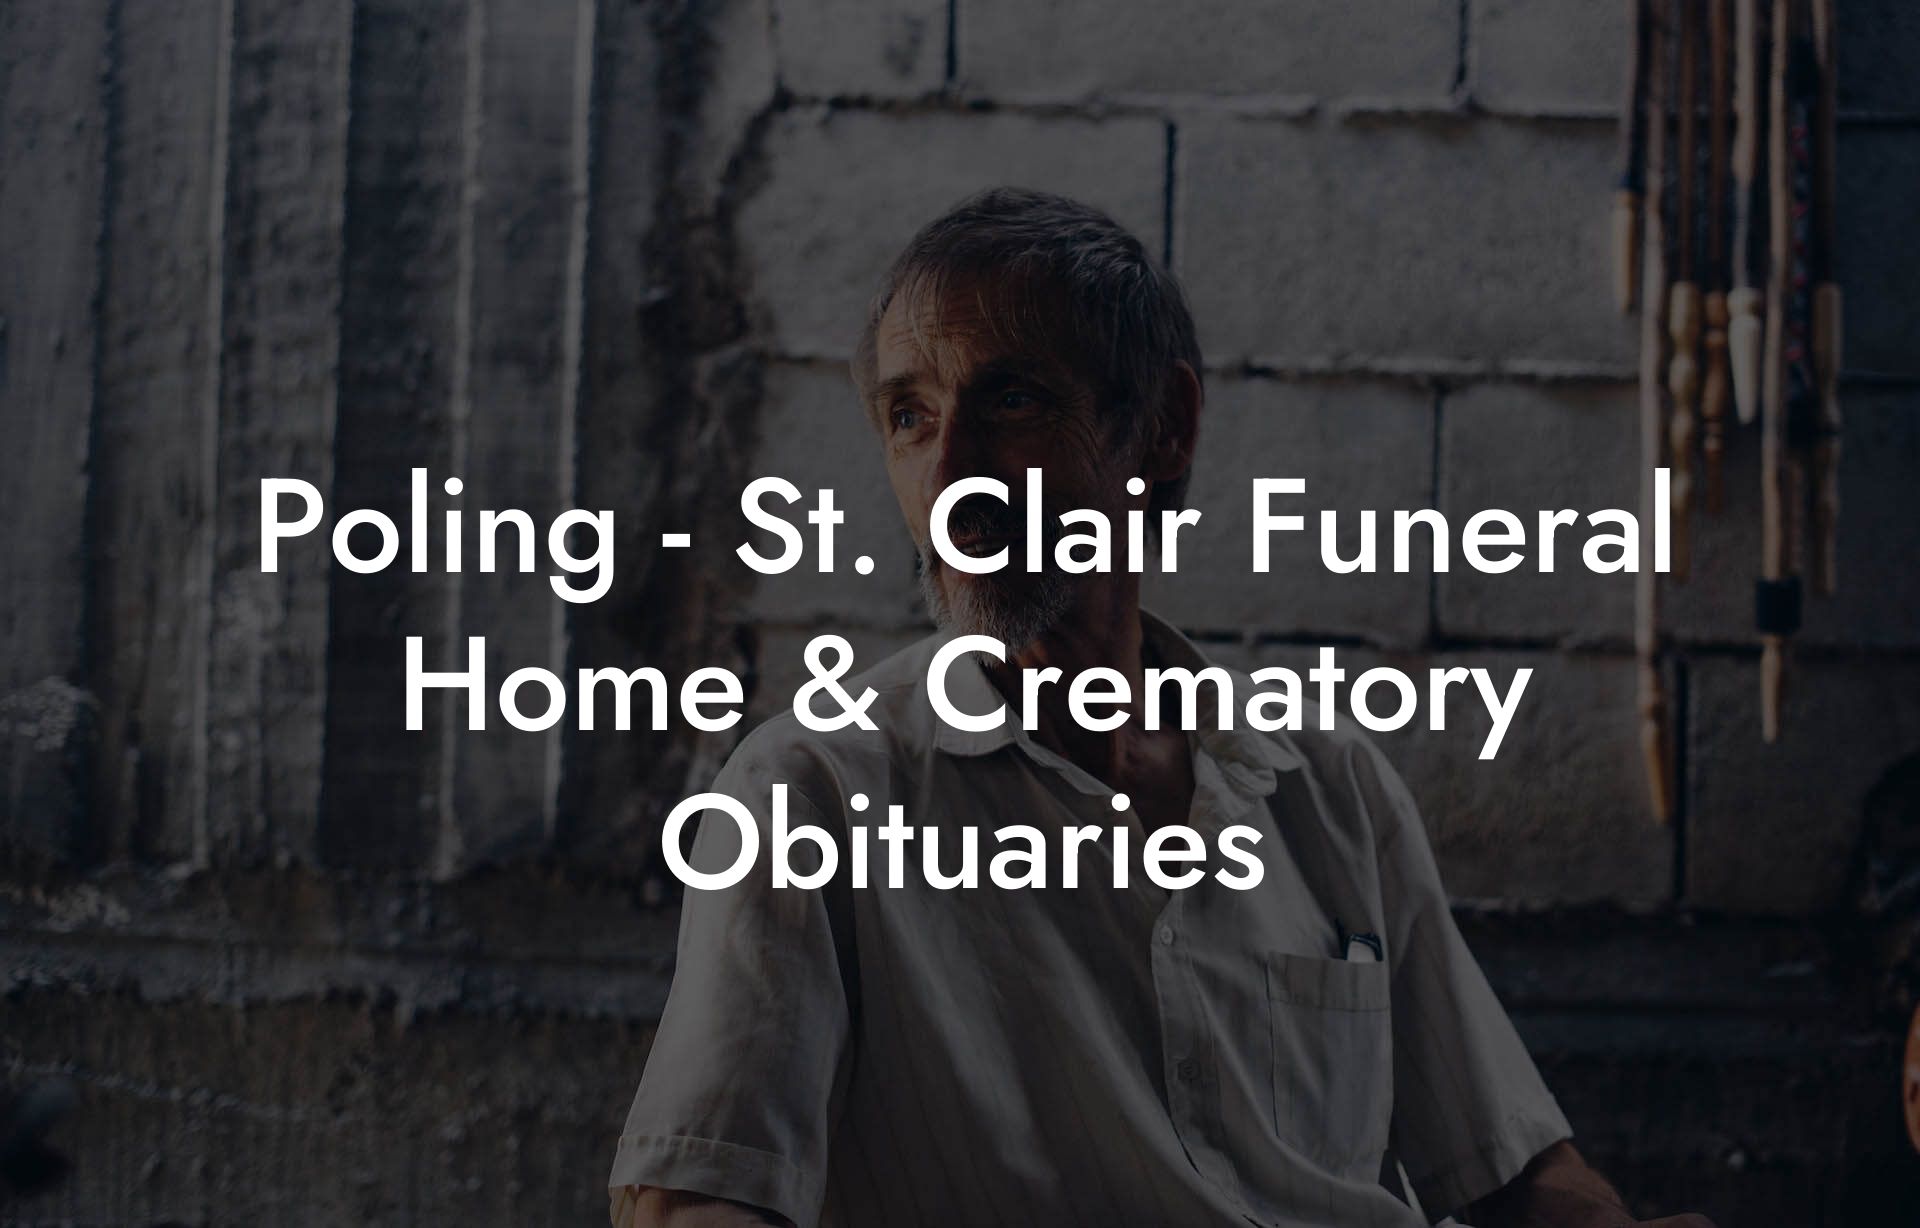 Poling - St. Clair Funeral Home & Crematory Obituaries